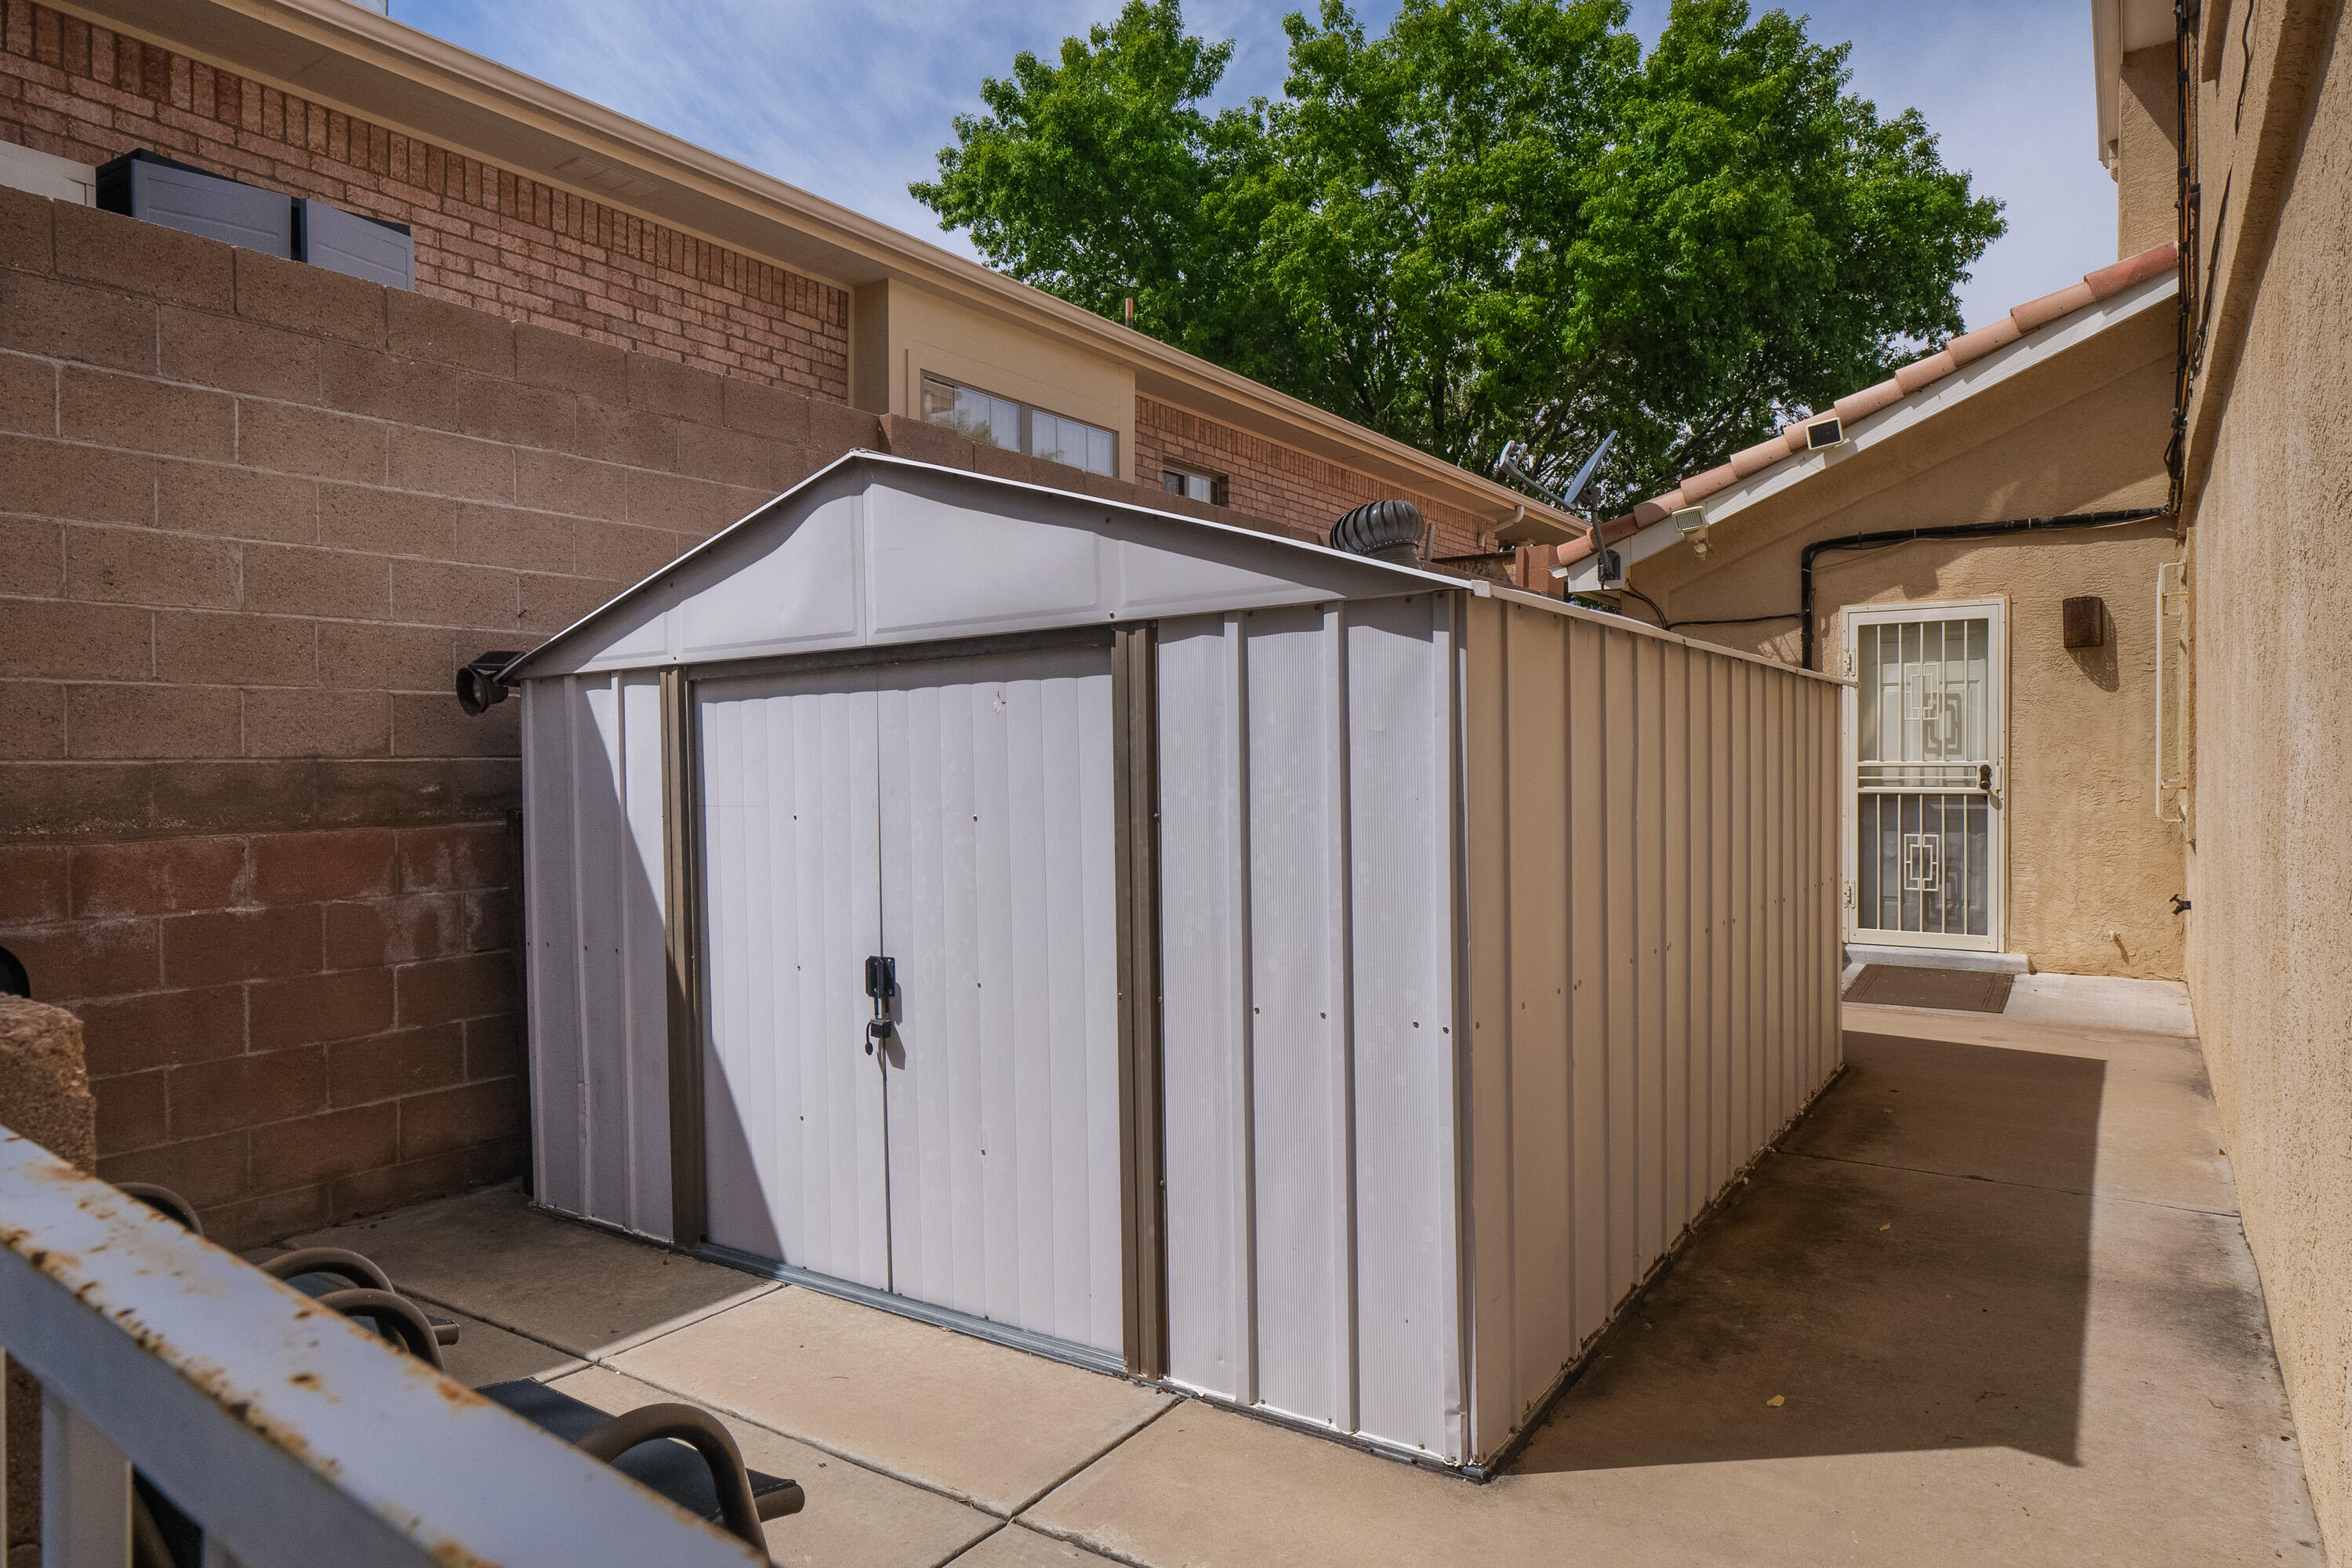 4500 Cumberland Road NW, Albuquerque, New Mexico 87120, 4 Bedrooms Bedrooms, ,3 BathroomsBathrooms,Residential,For Sale,4500 Cumberland Road NW,1059642